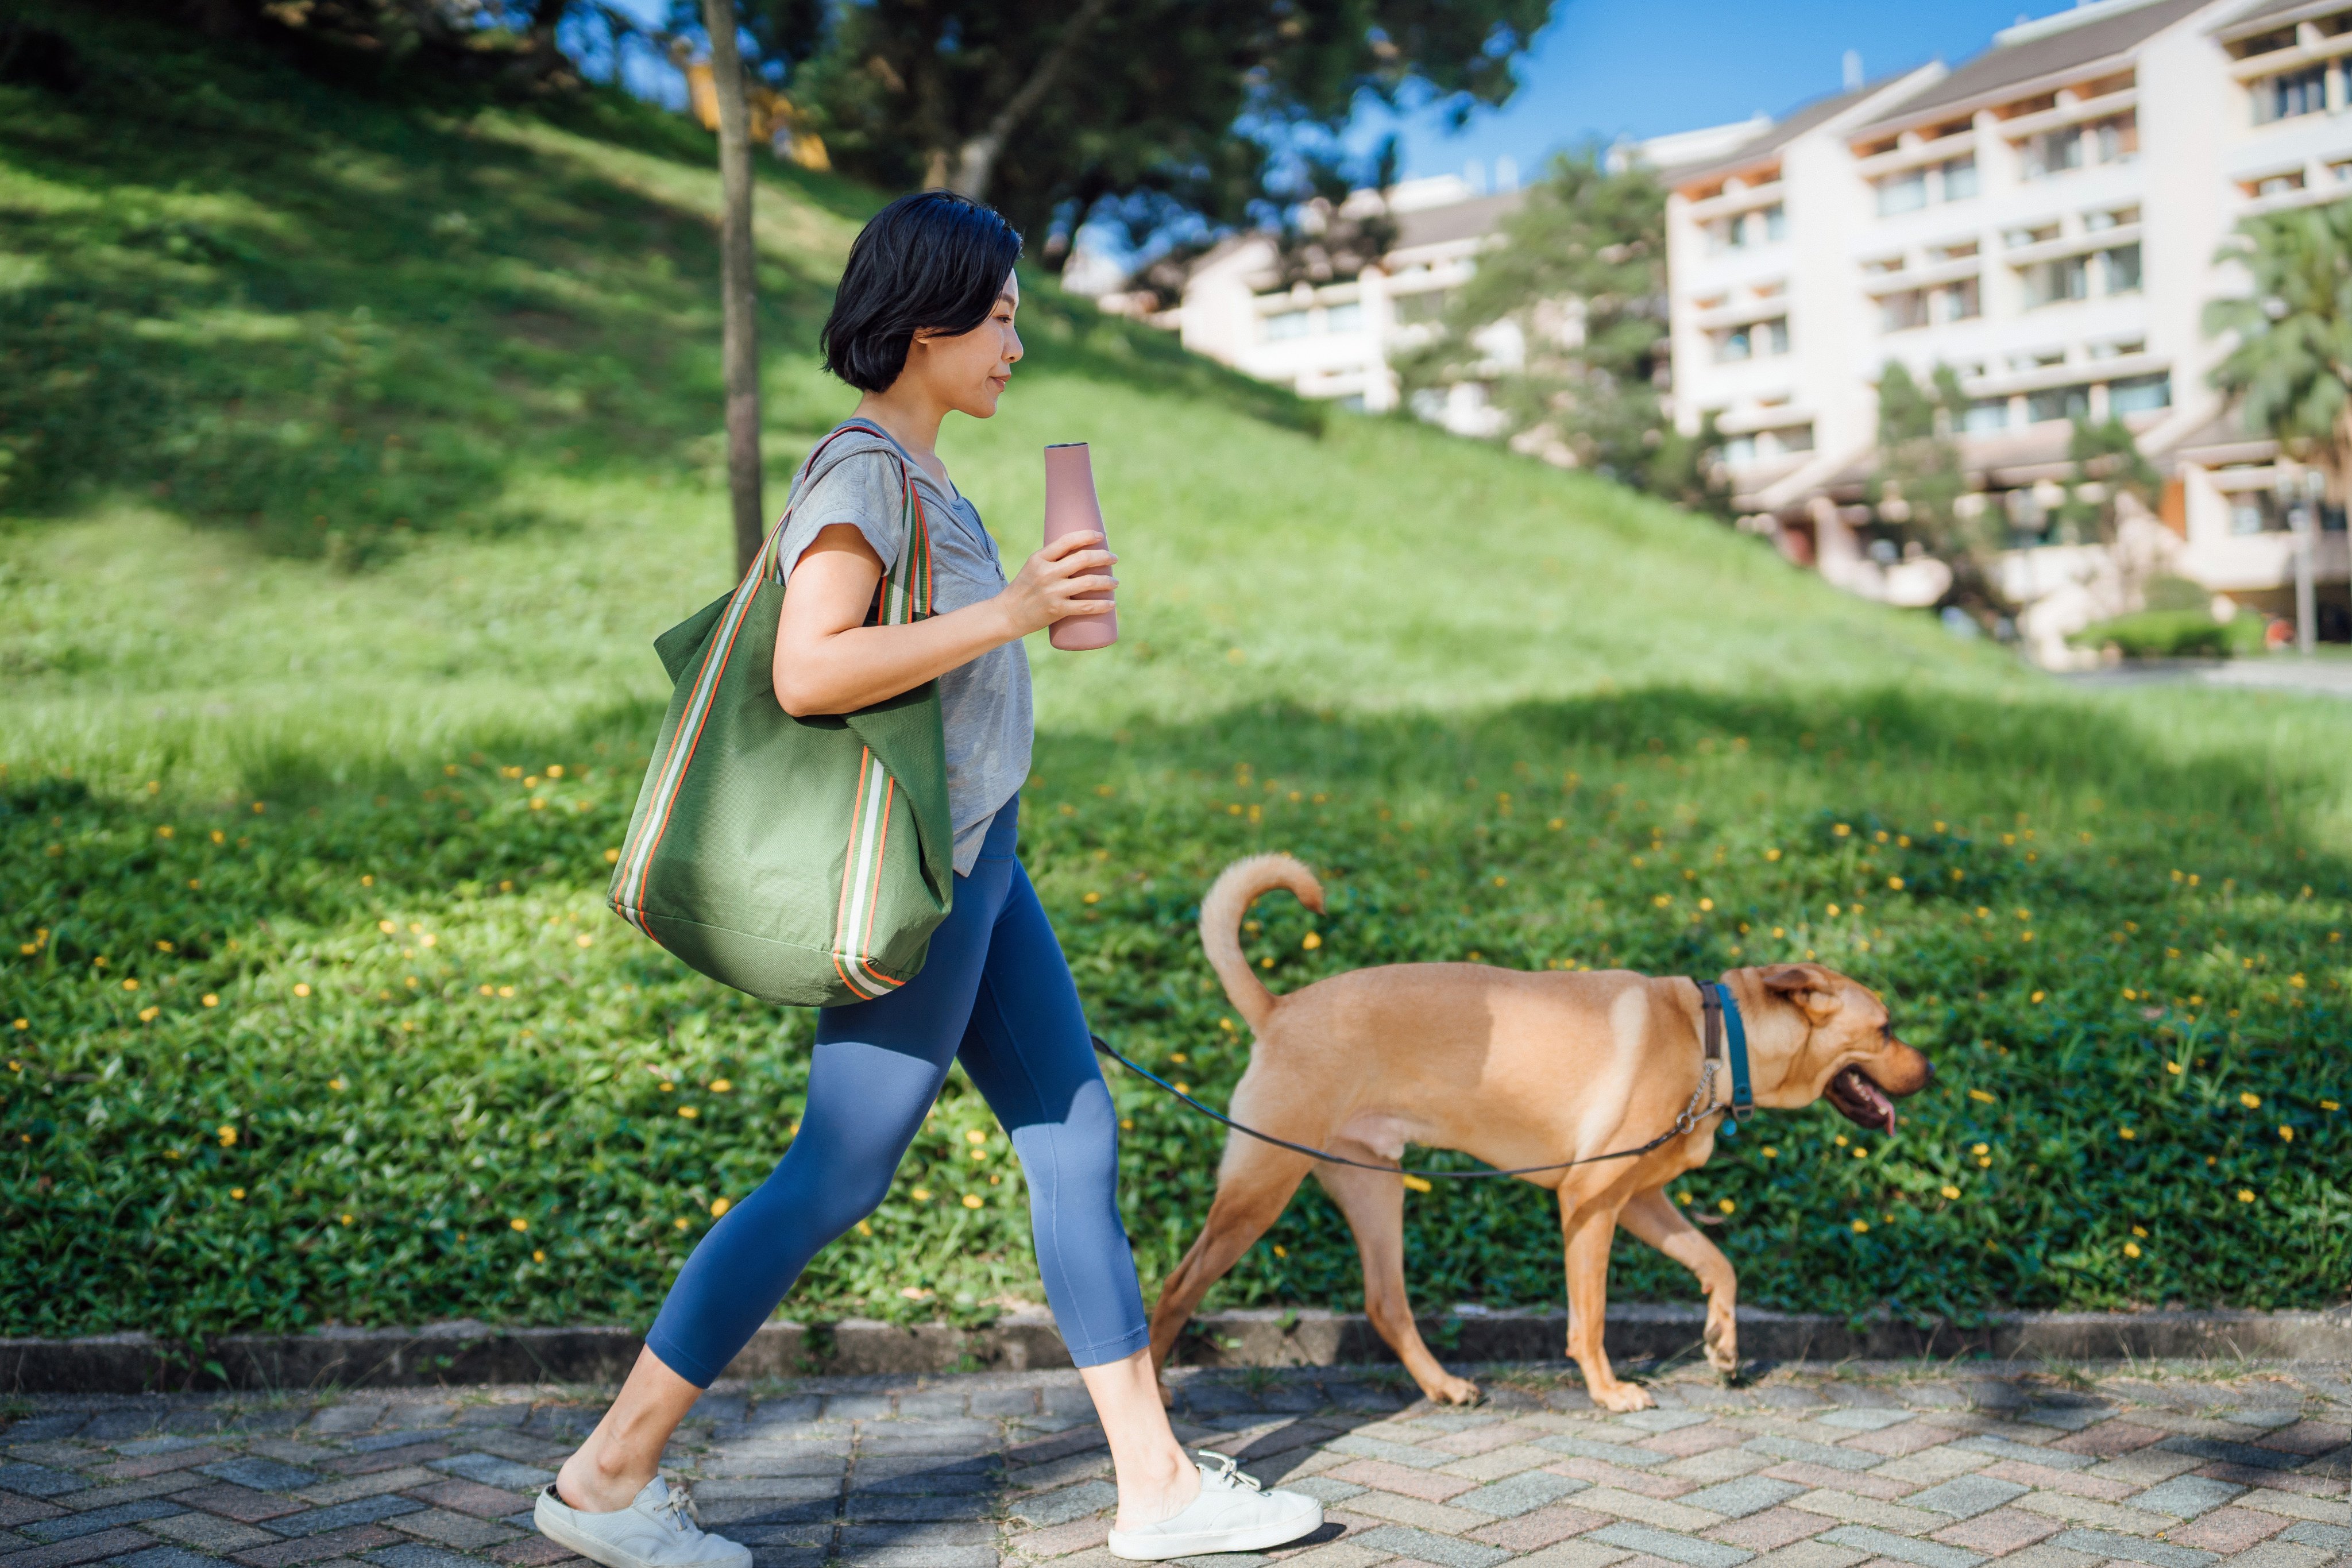 A woman walks her dog on a leash in the park. Photo: Getty Images